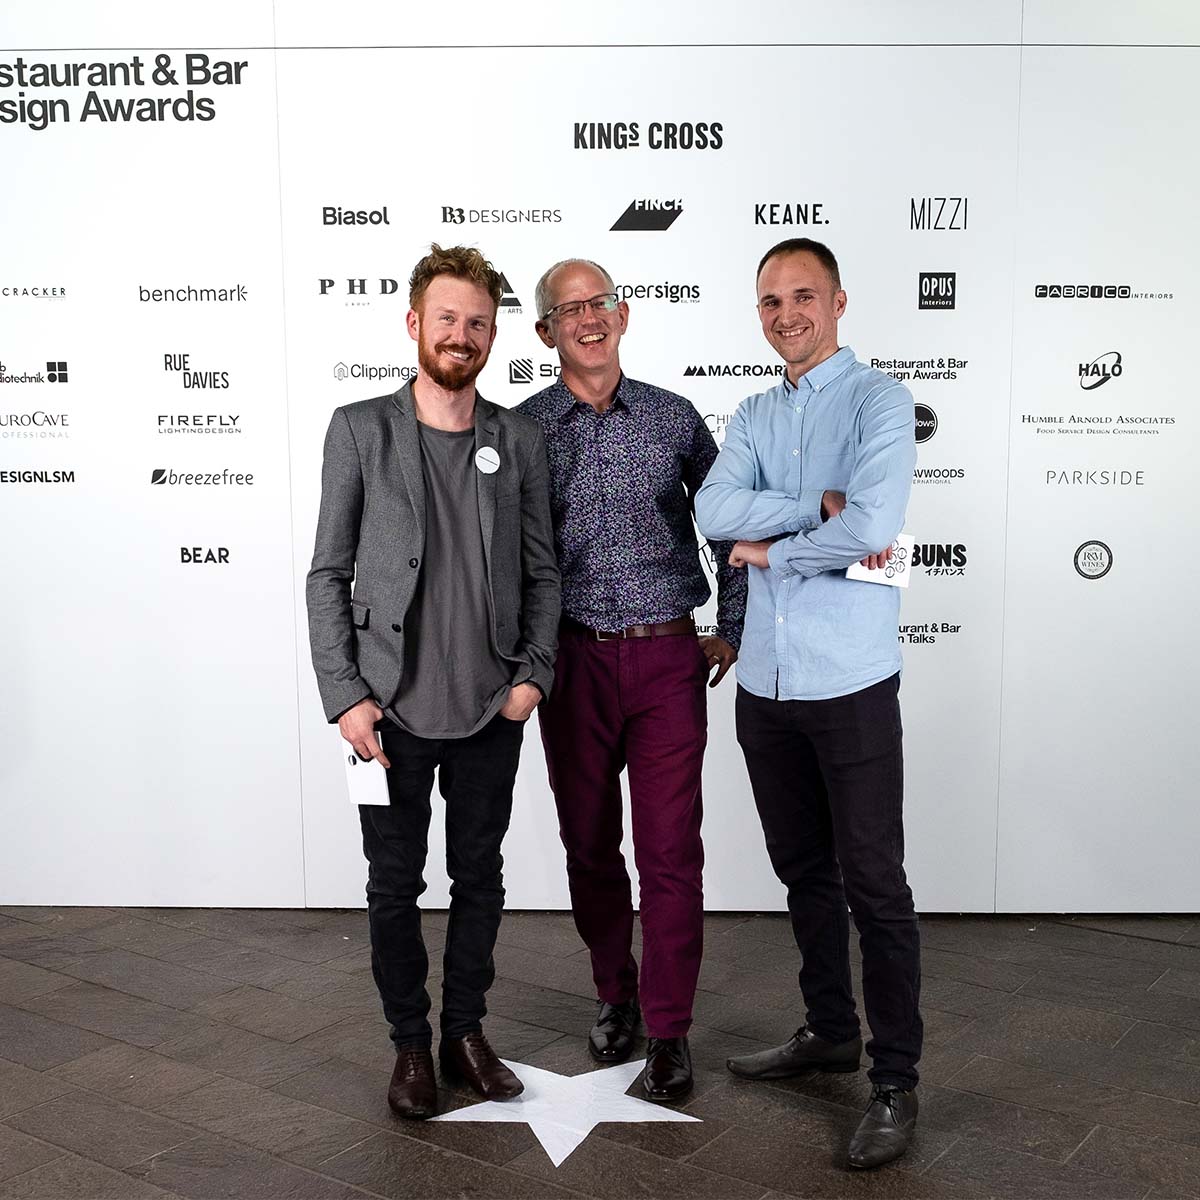 Craig Bunting, Chris Price & Michael Thorley are the Co-founders & Directors of BEAR